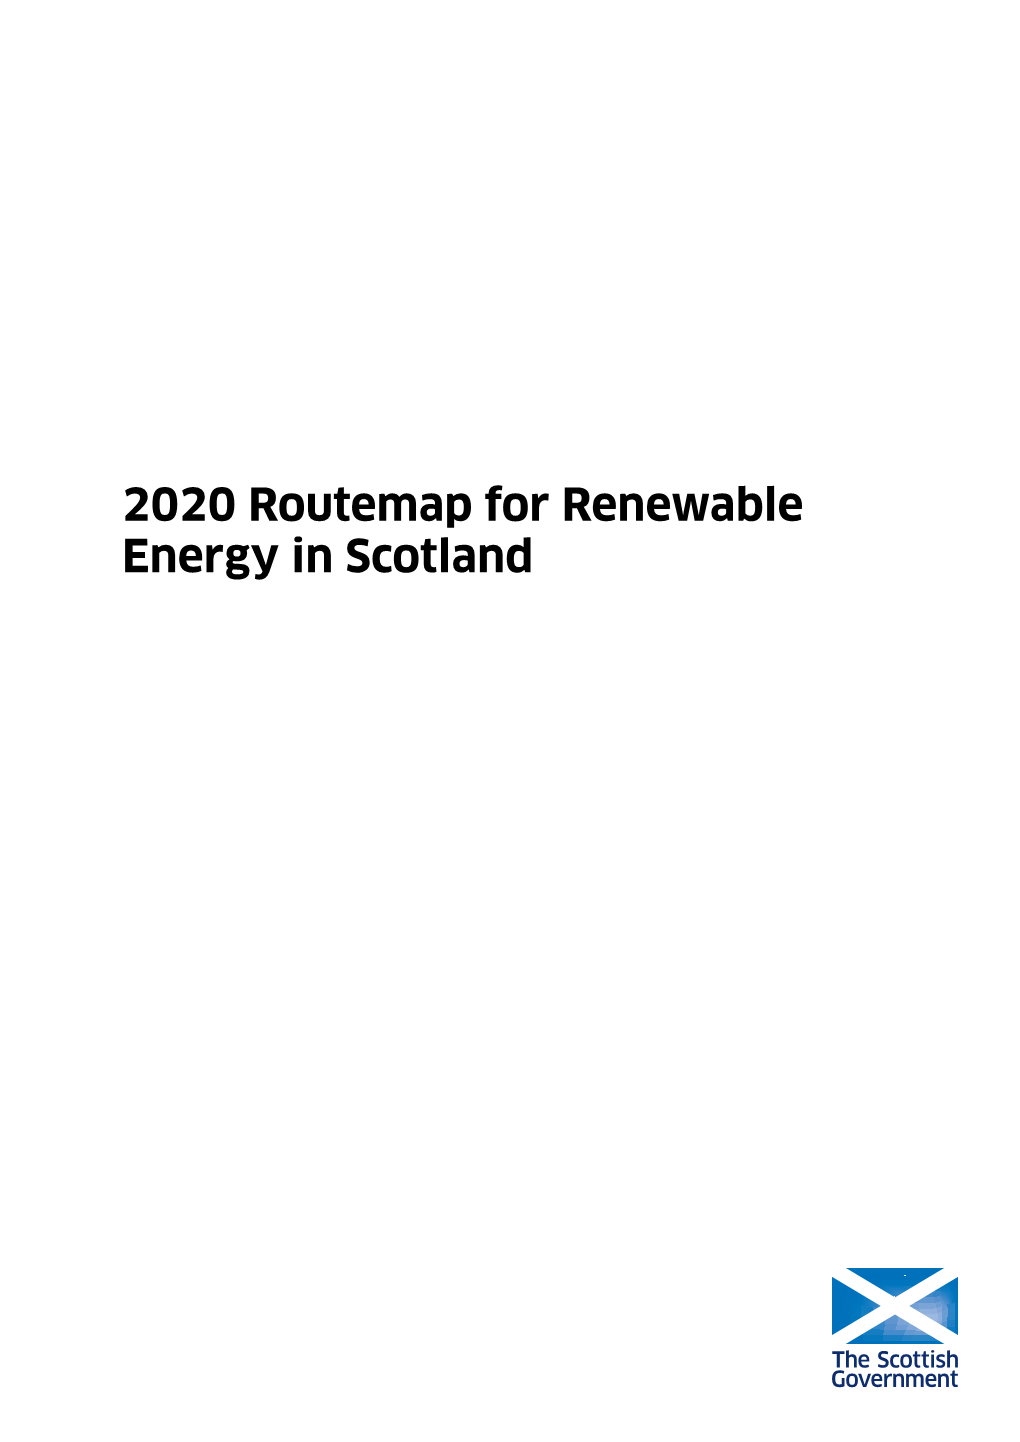 2020 Routemap for Renewable Energy in Scotland 2020 Routemap for Renewable Energy in Scotland